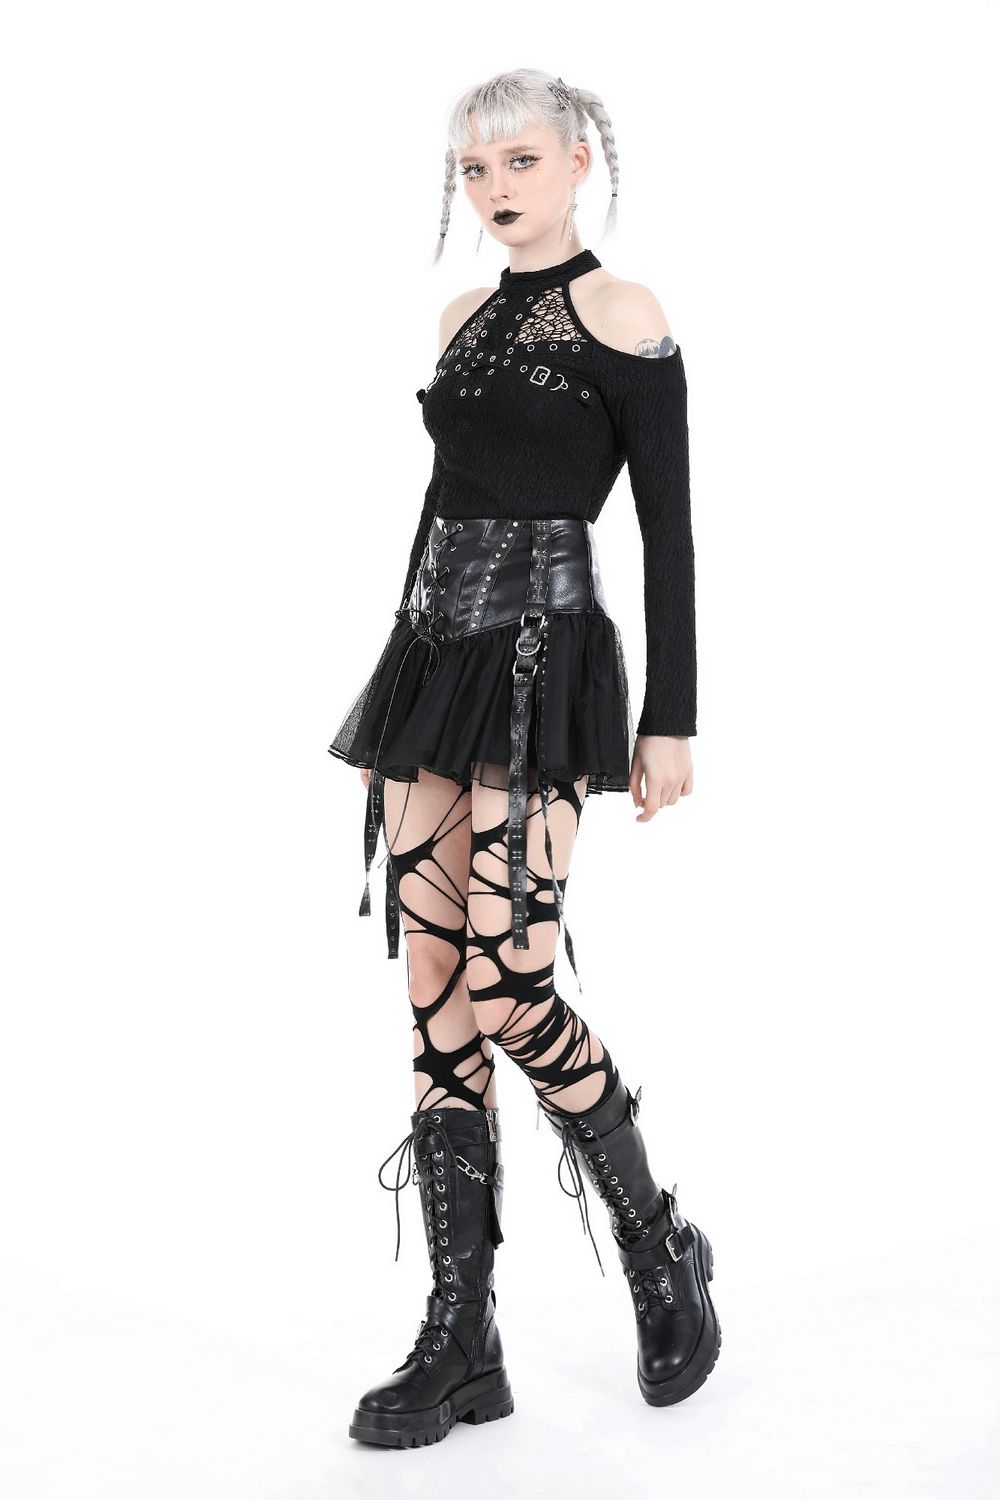 Black Tulle Skirt with Lace-Up Front And Studded